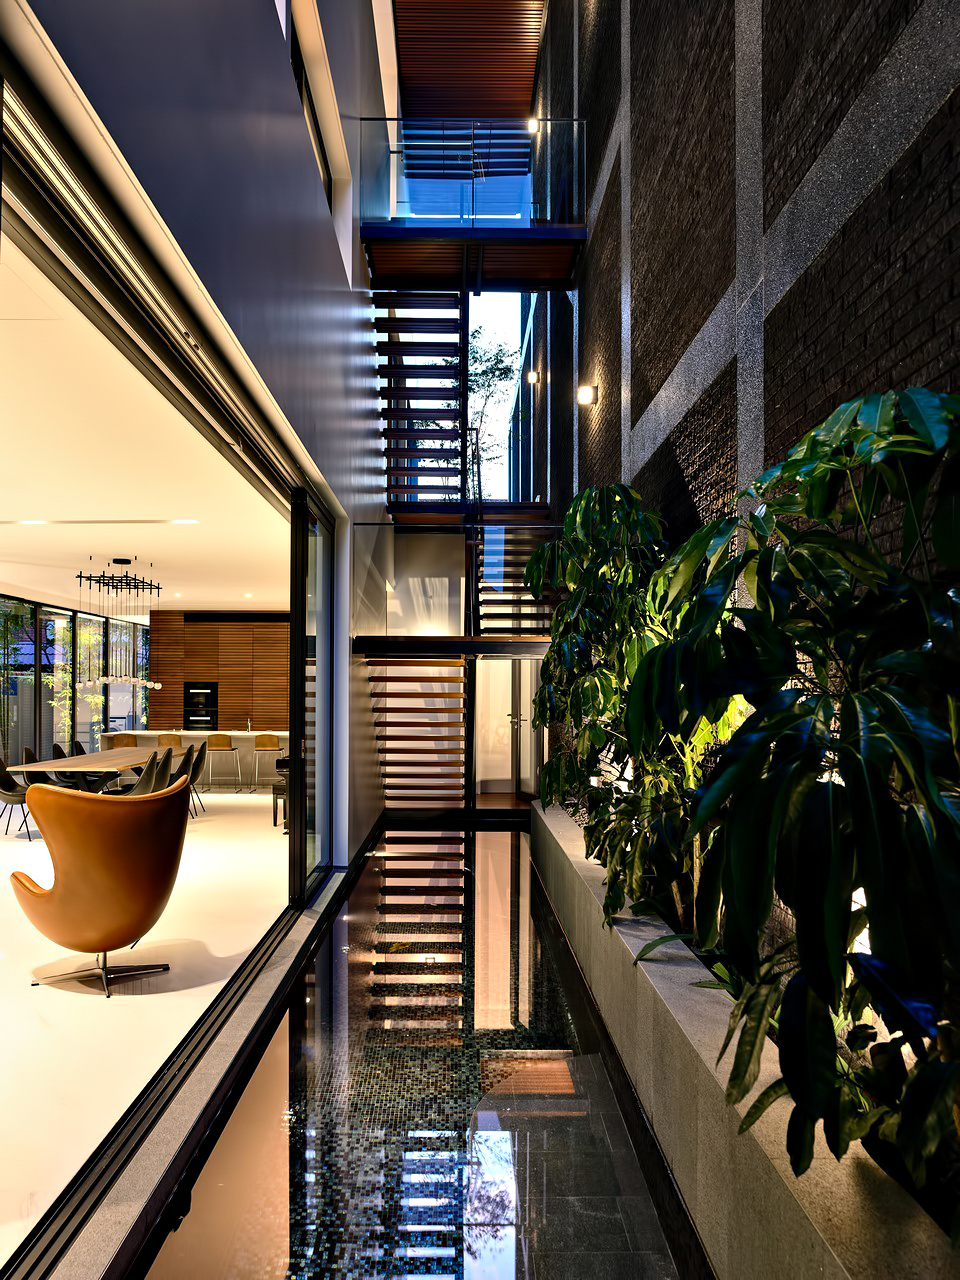 The Space Between Walls House – Prices of Wales Rd, Singapore